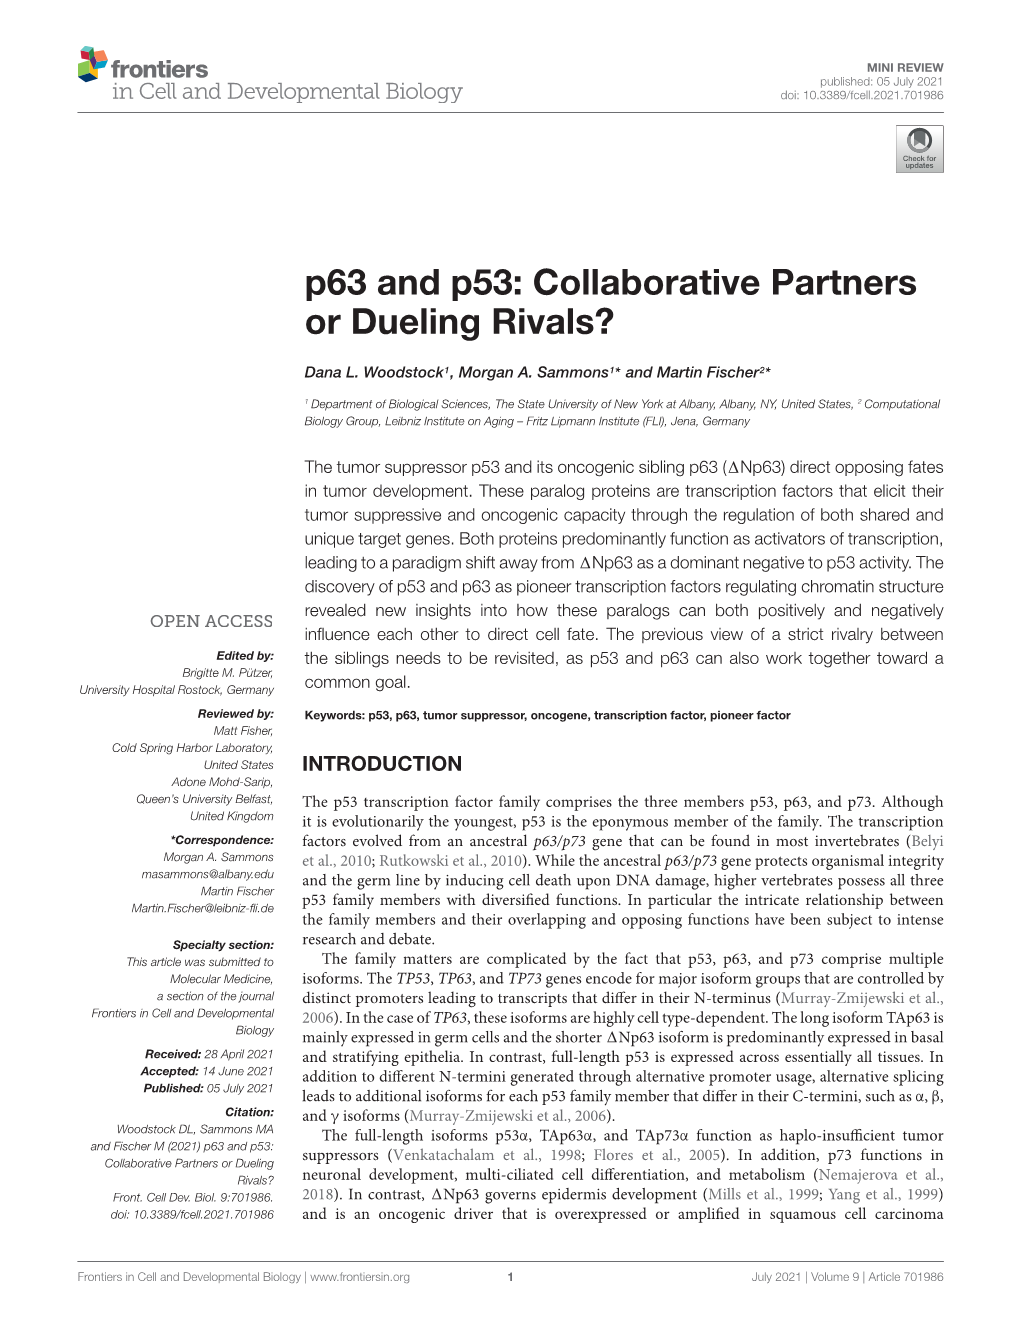 P63 and P53: Collaborative Partners Or Dueling Rivals?